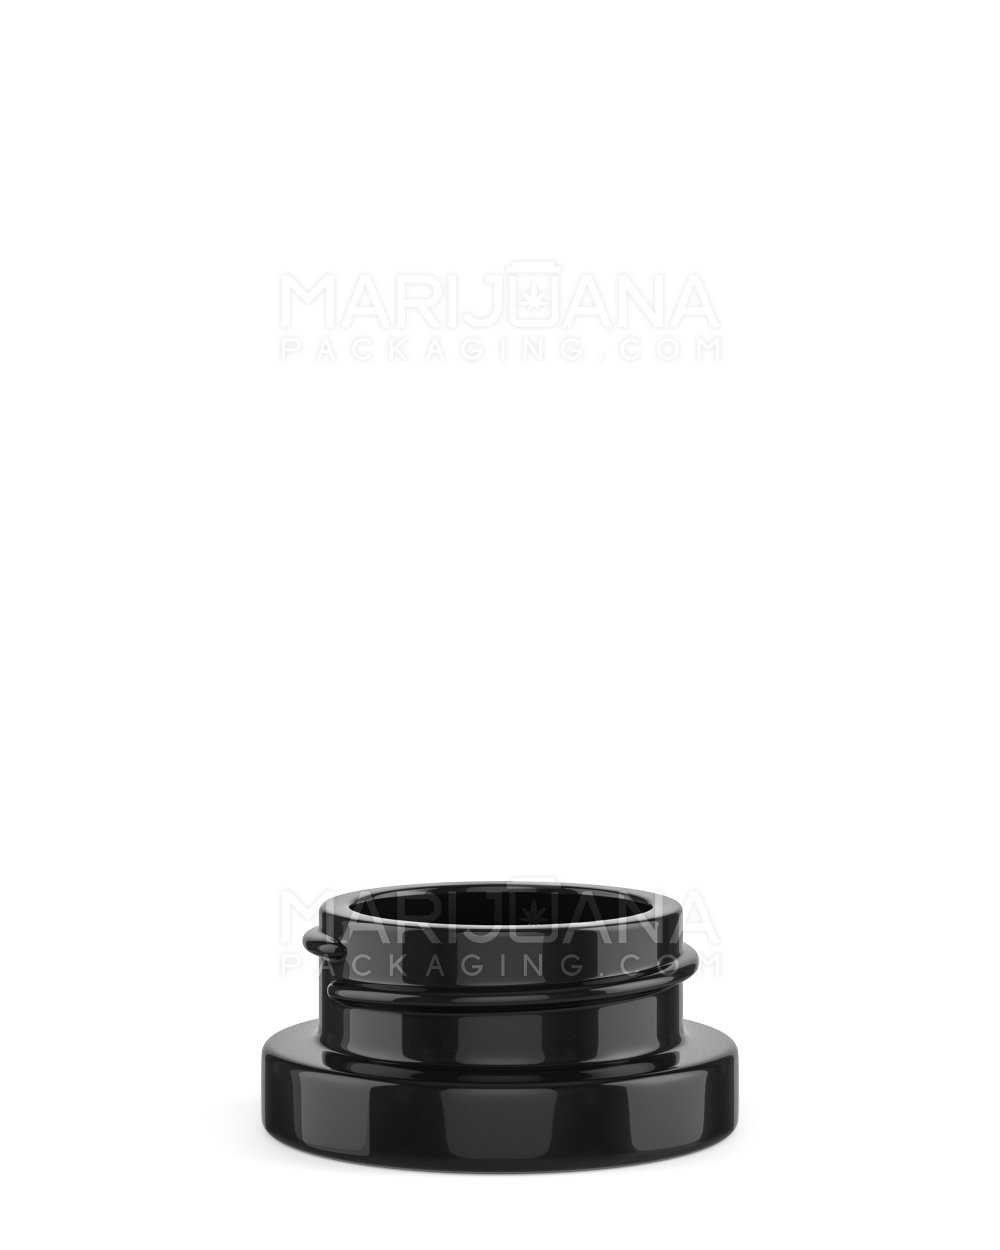 Glossy Black Glass Concentrate Containers | 38mm - 9mL - 320 Count - 1